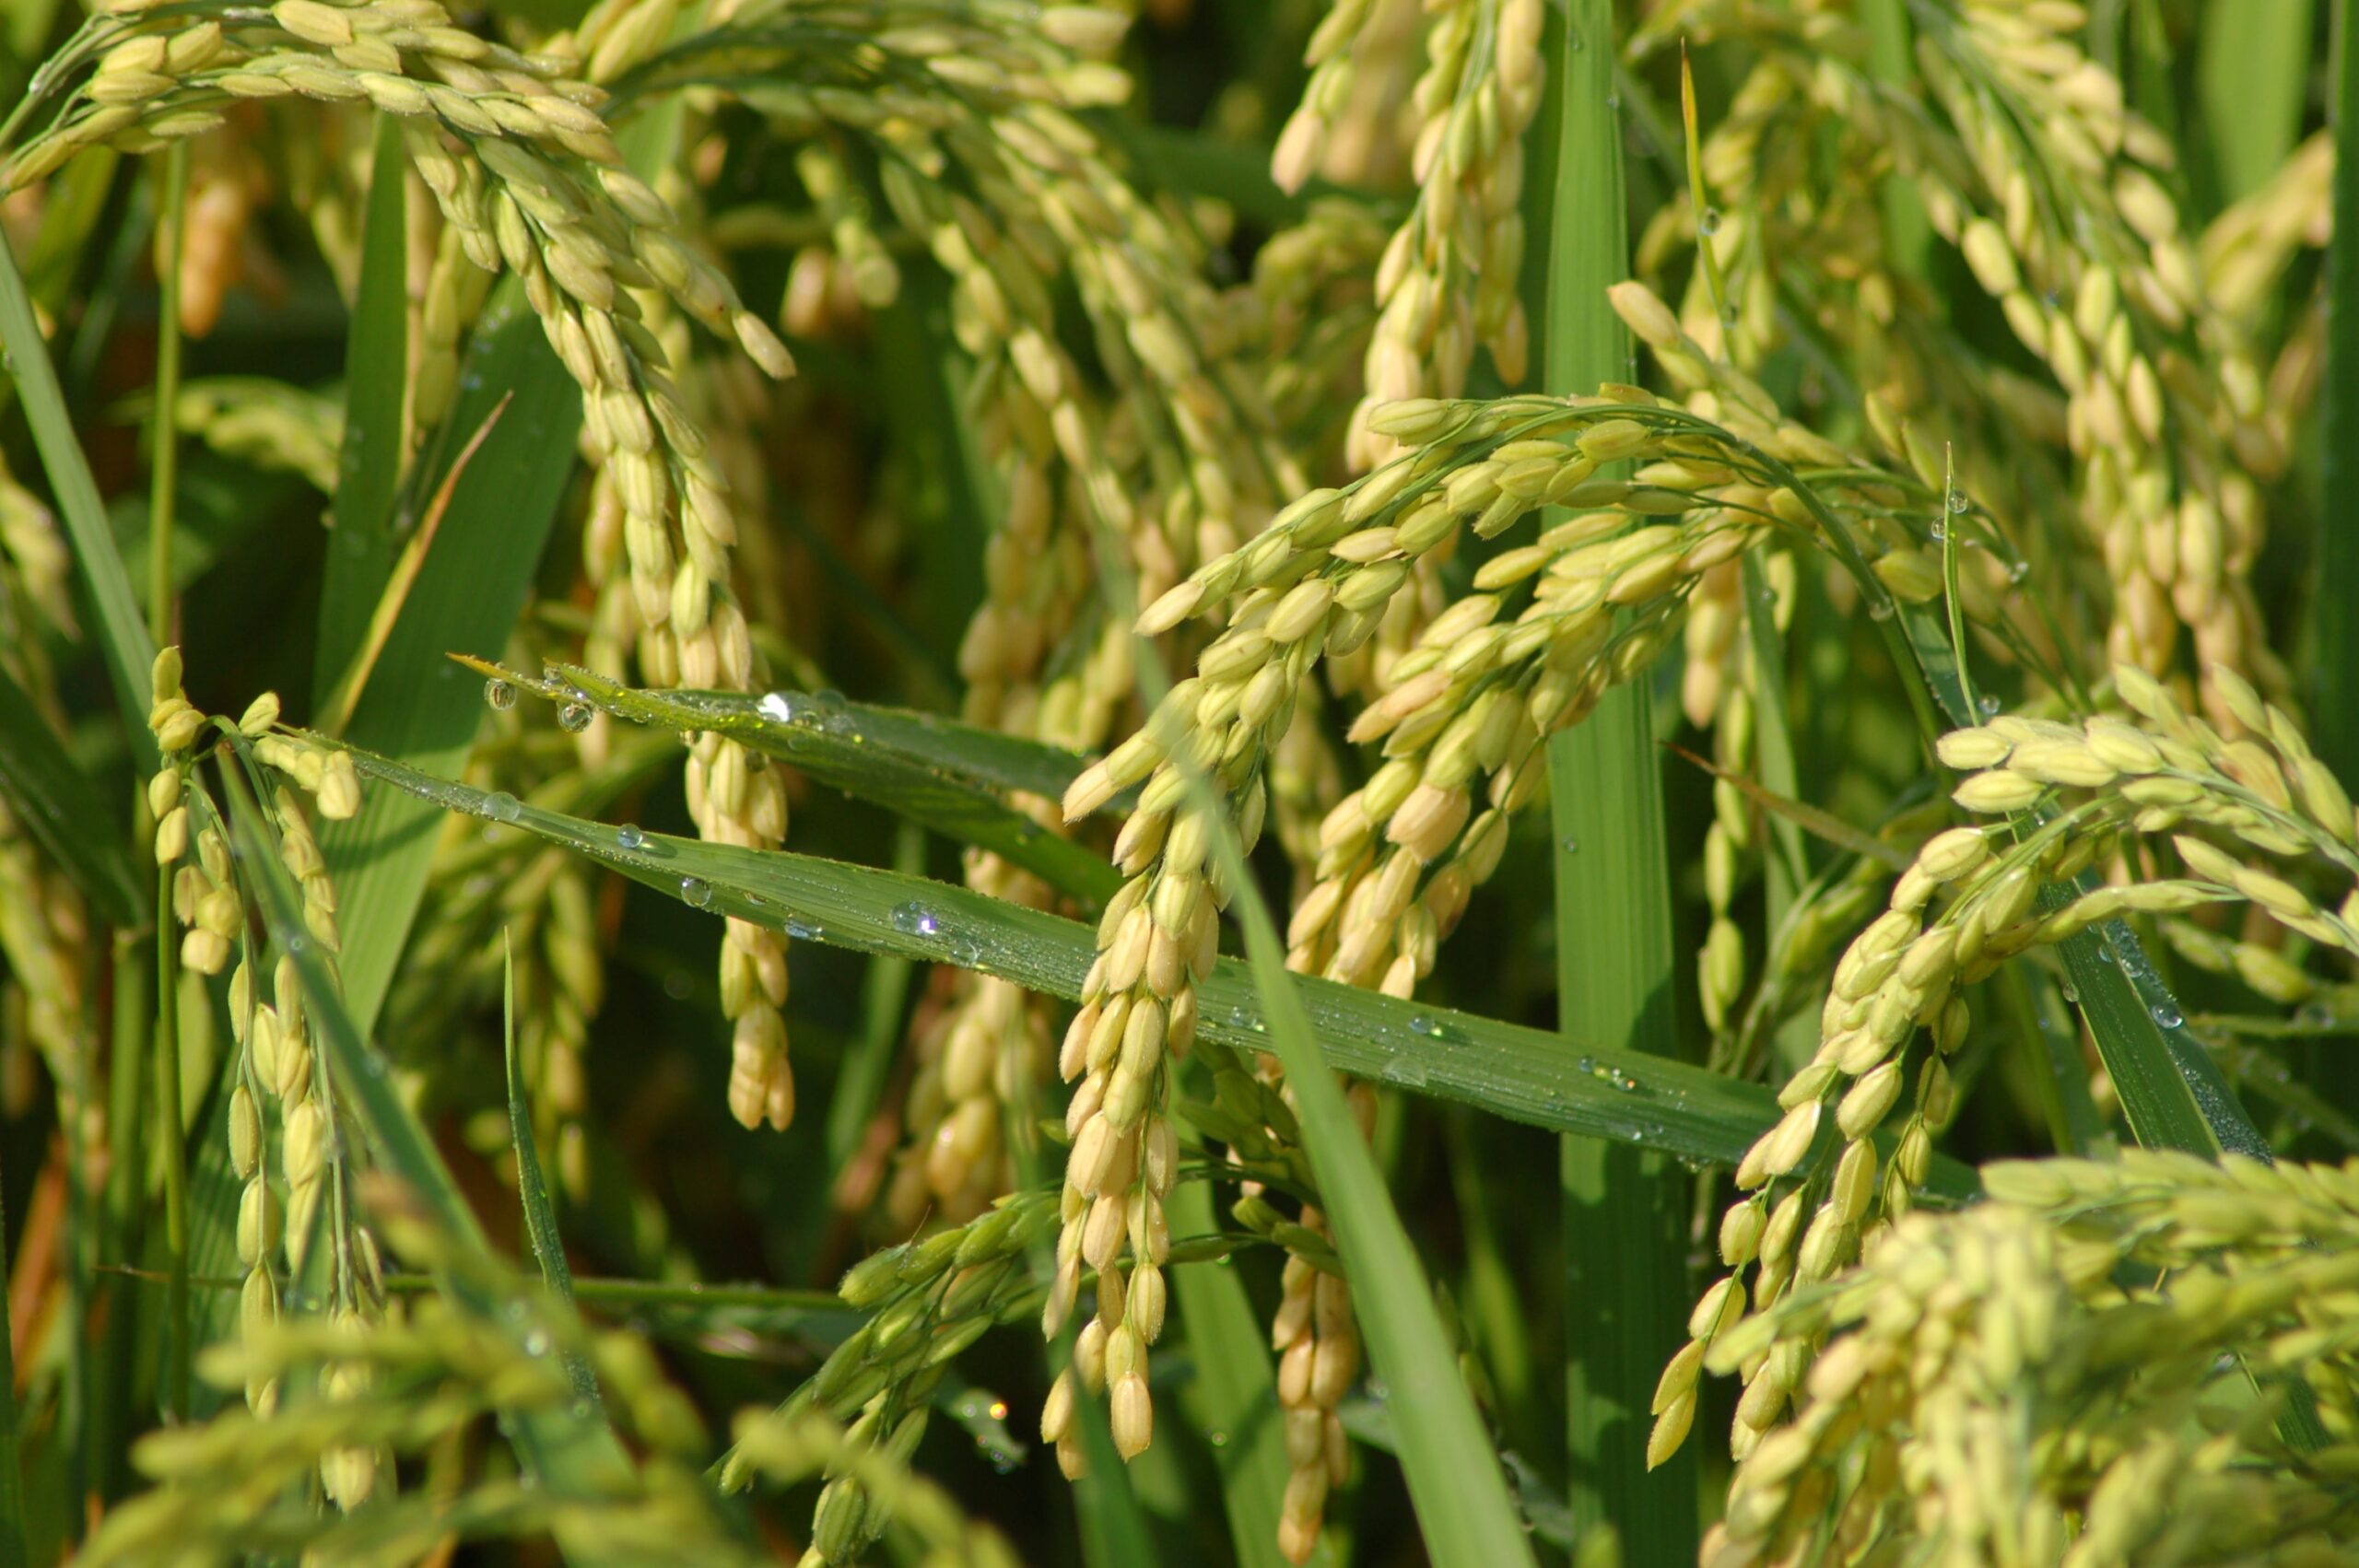 thuannguyenrice.com
Challenges and Innovations in Rice Farming